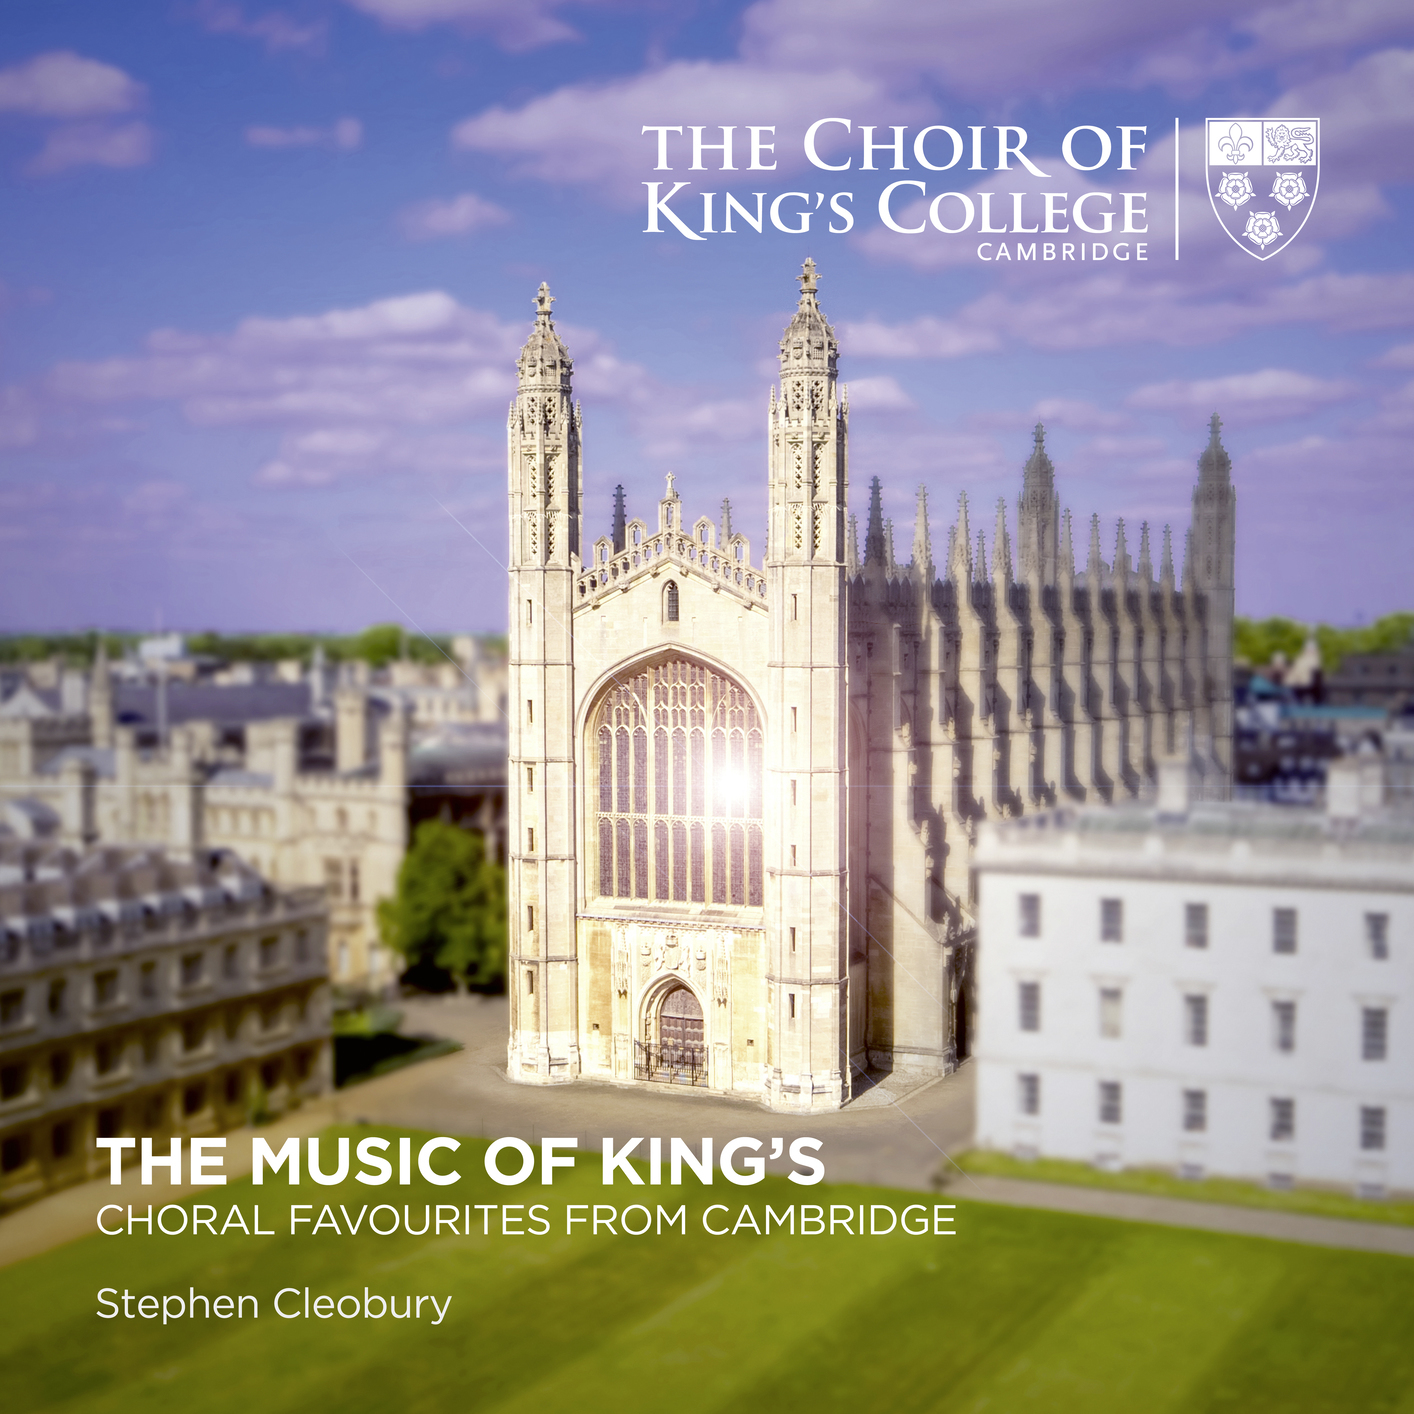 Stephen Cleobury & Choir of King’s College, Cambridge - The Music of King’s: Choral Favourites from Cambridge (2019) [FLAC 24bit/96kHz]